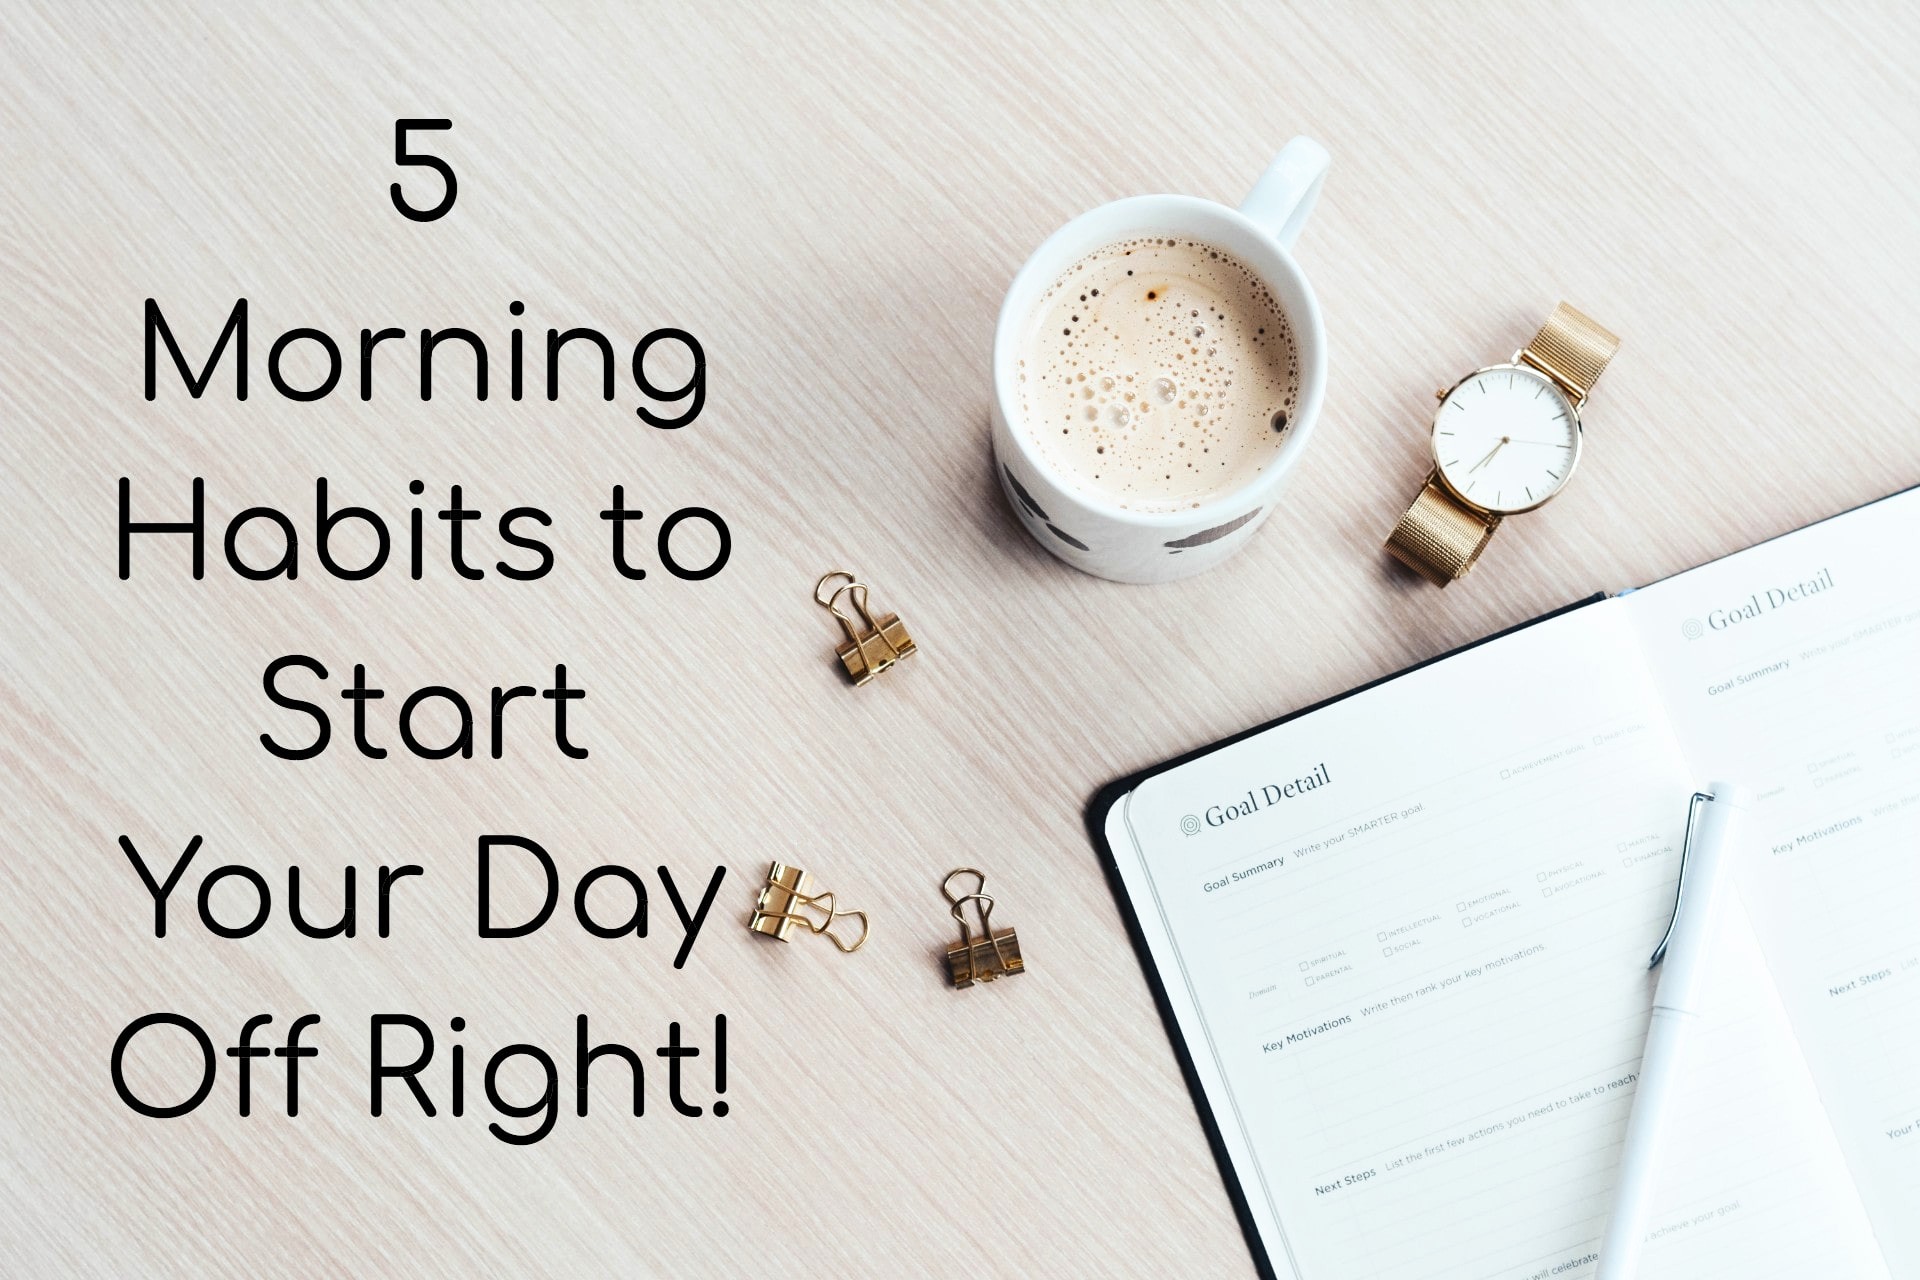 5 Morning Habits to Start Your Day Off Right